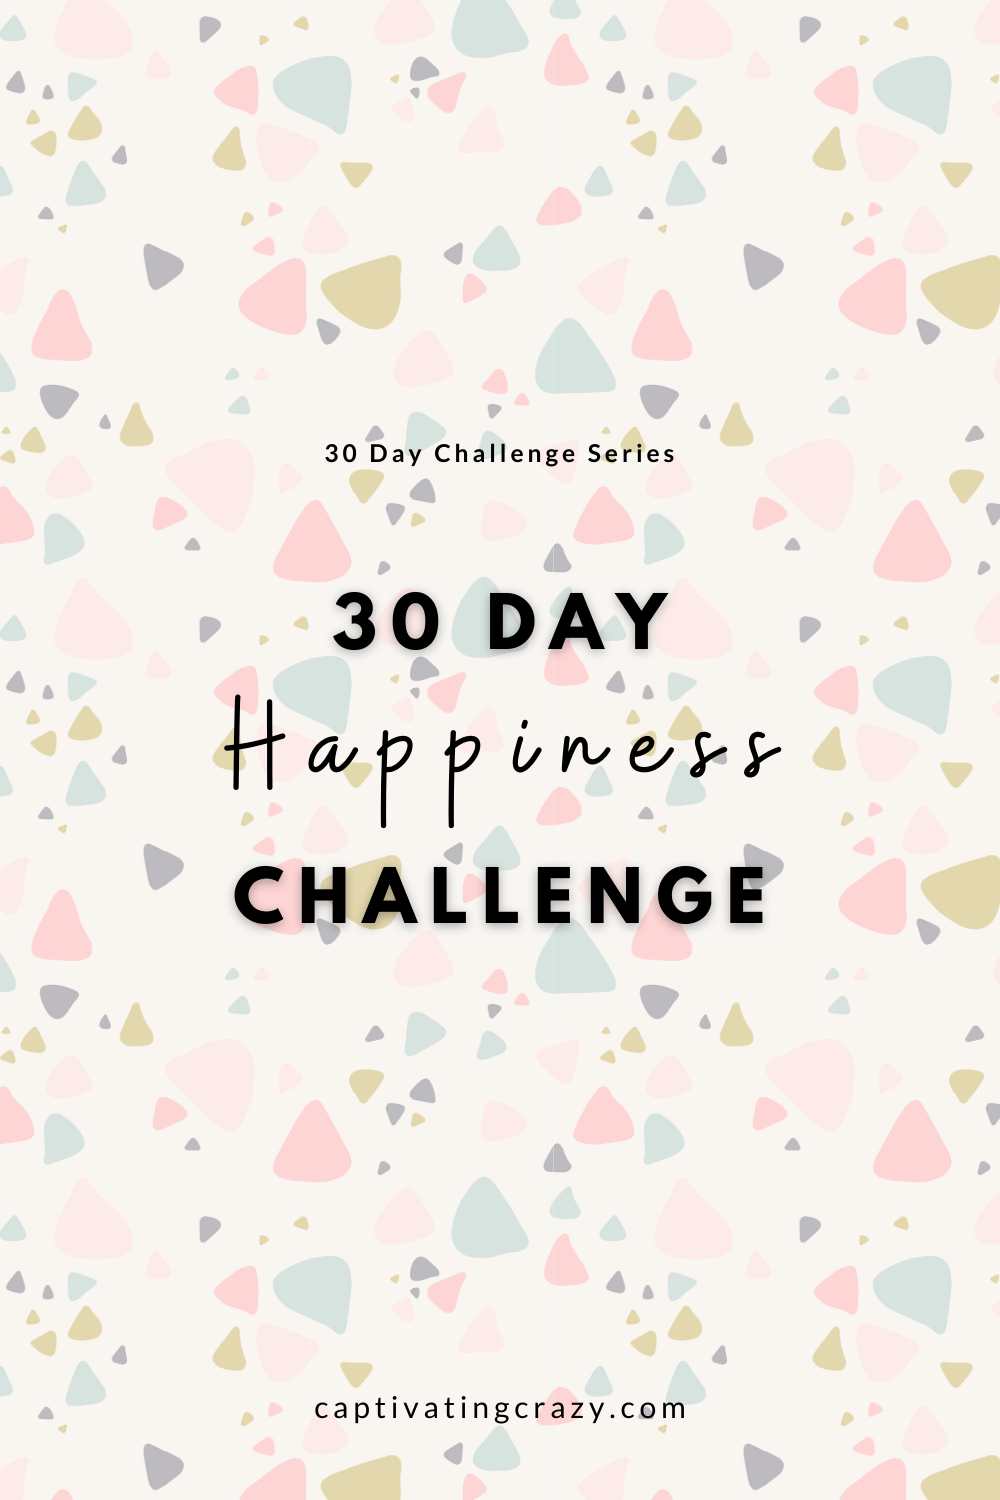 30 Day Happiness Challenge That Will Change Your Life! Complete the tasks set for each day & find our how to become happier within 30 days! #30daychallenge #howtobe #happy #happiness #howtobehappy #challenge 